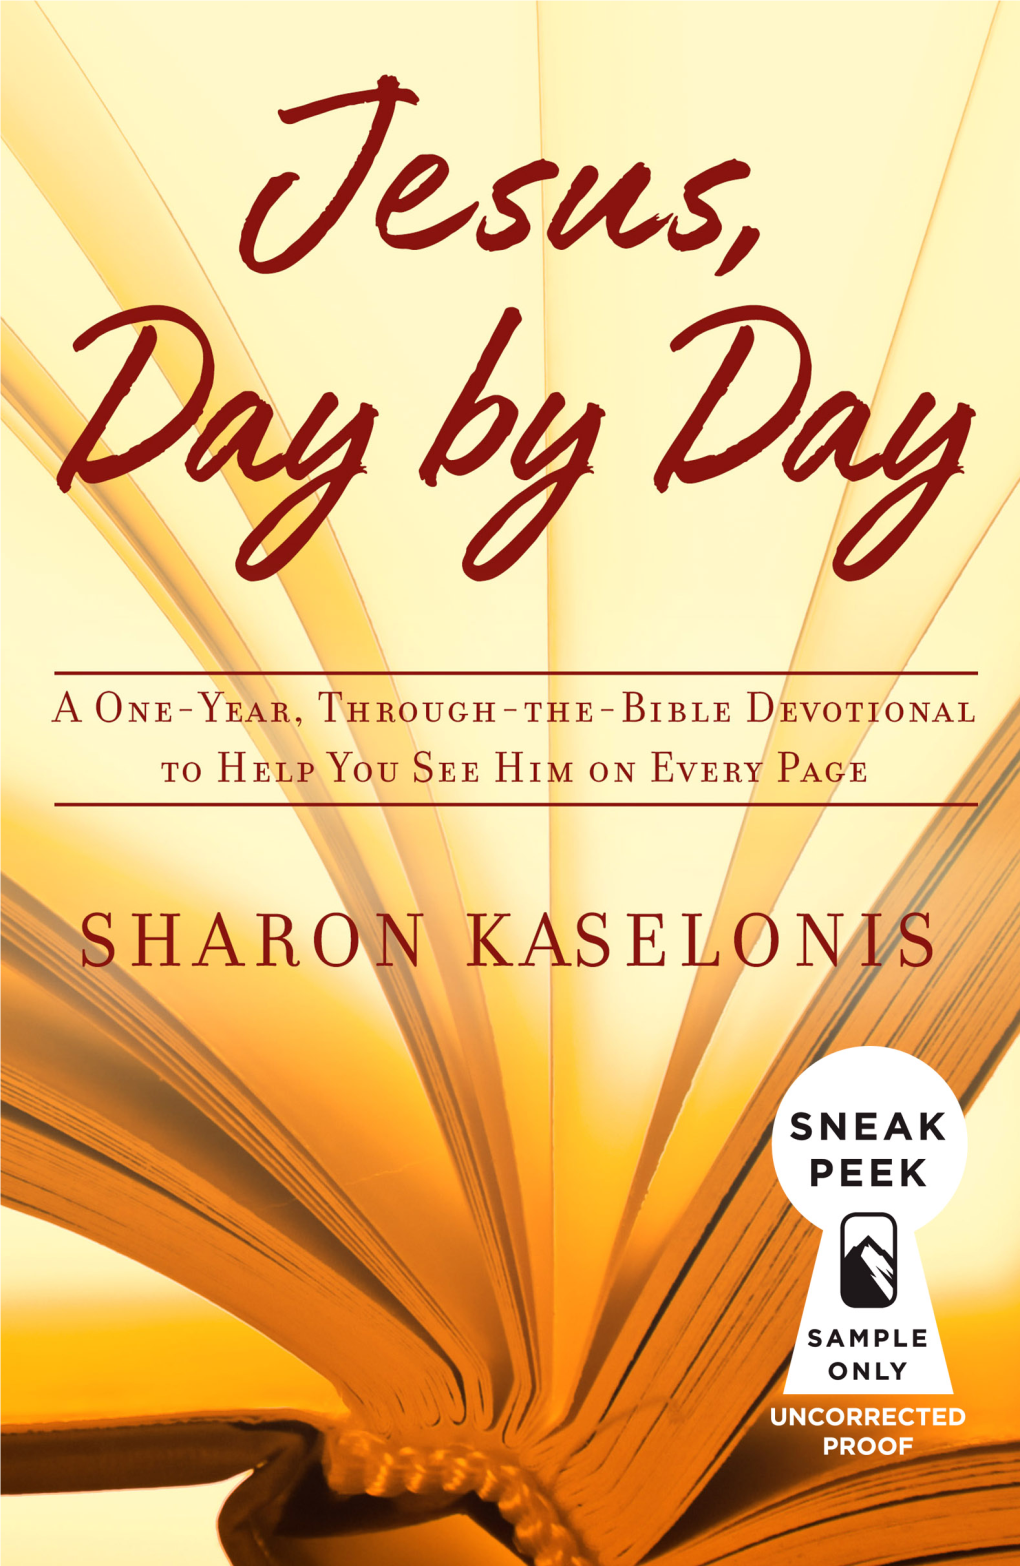 Read the First Few Pages of Jesus, Day by Day